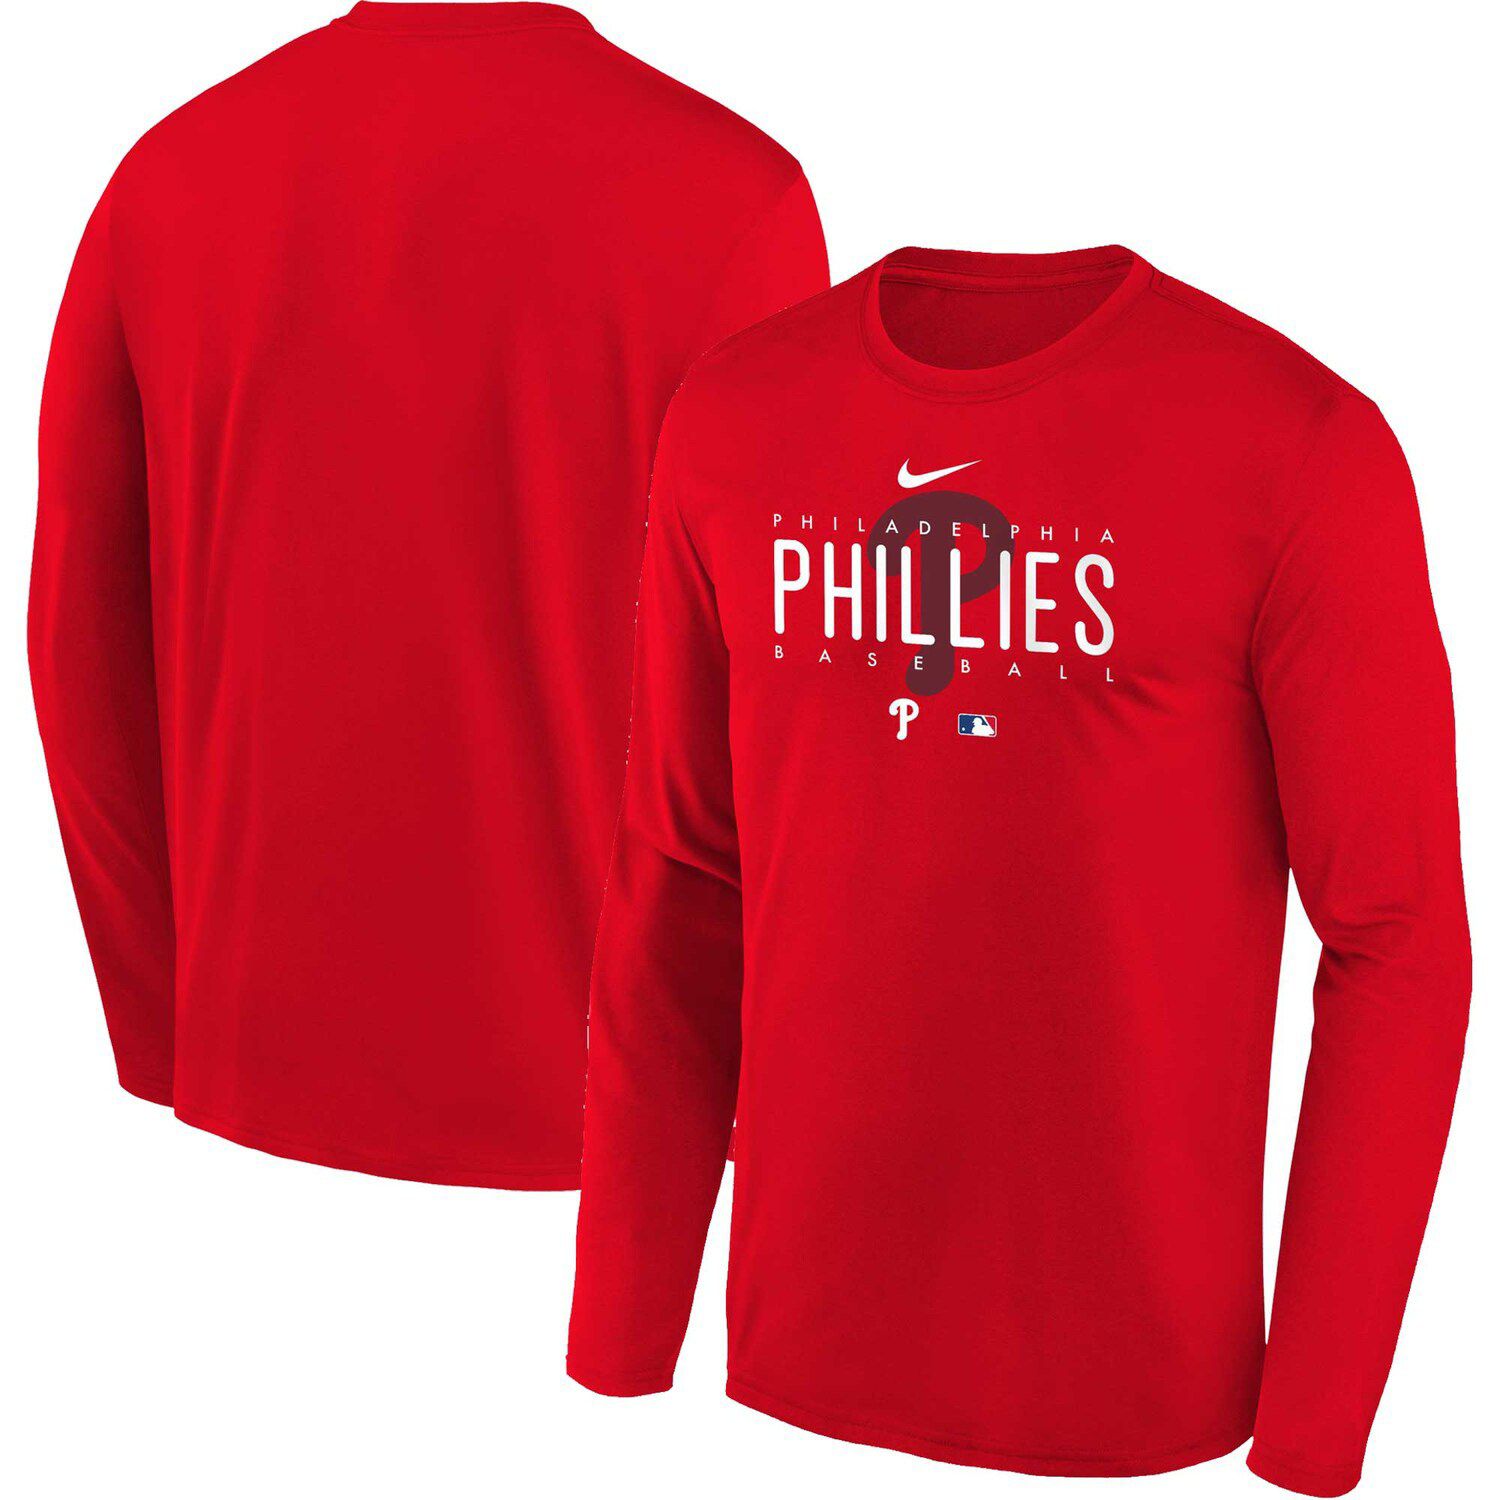 Outerstuff Youth Heather Charcoal/Heather Red Philadelphia Phillies  Cooperstown Collection Raglan Tri-Blend Long Sleeve T-Shirt